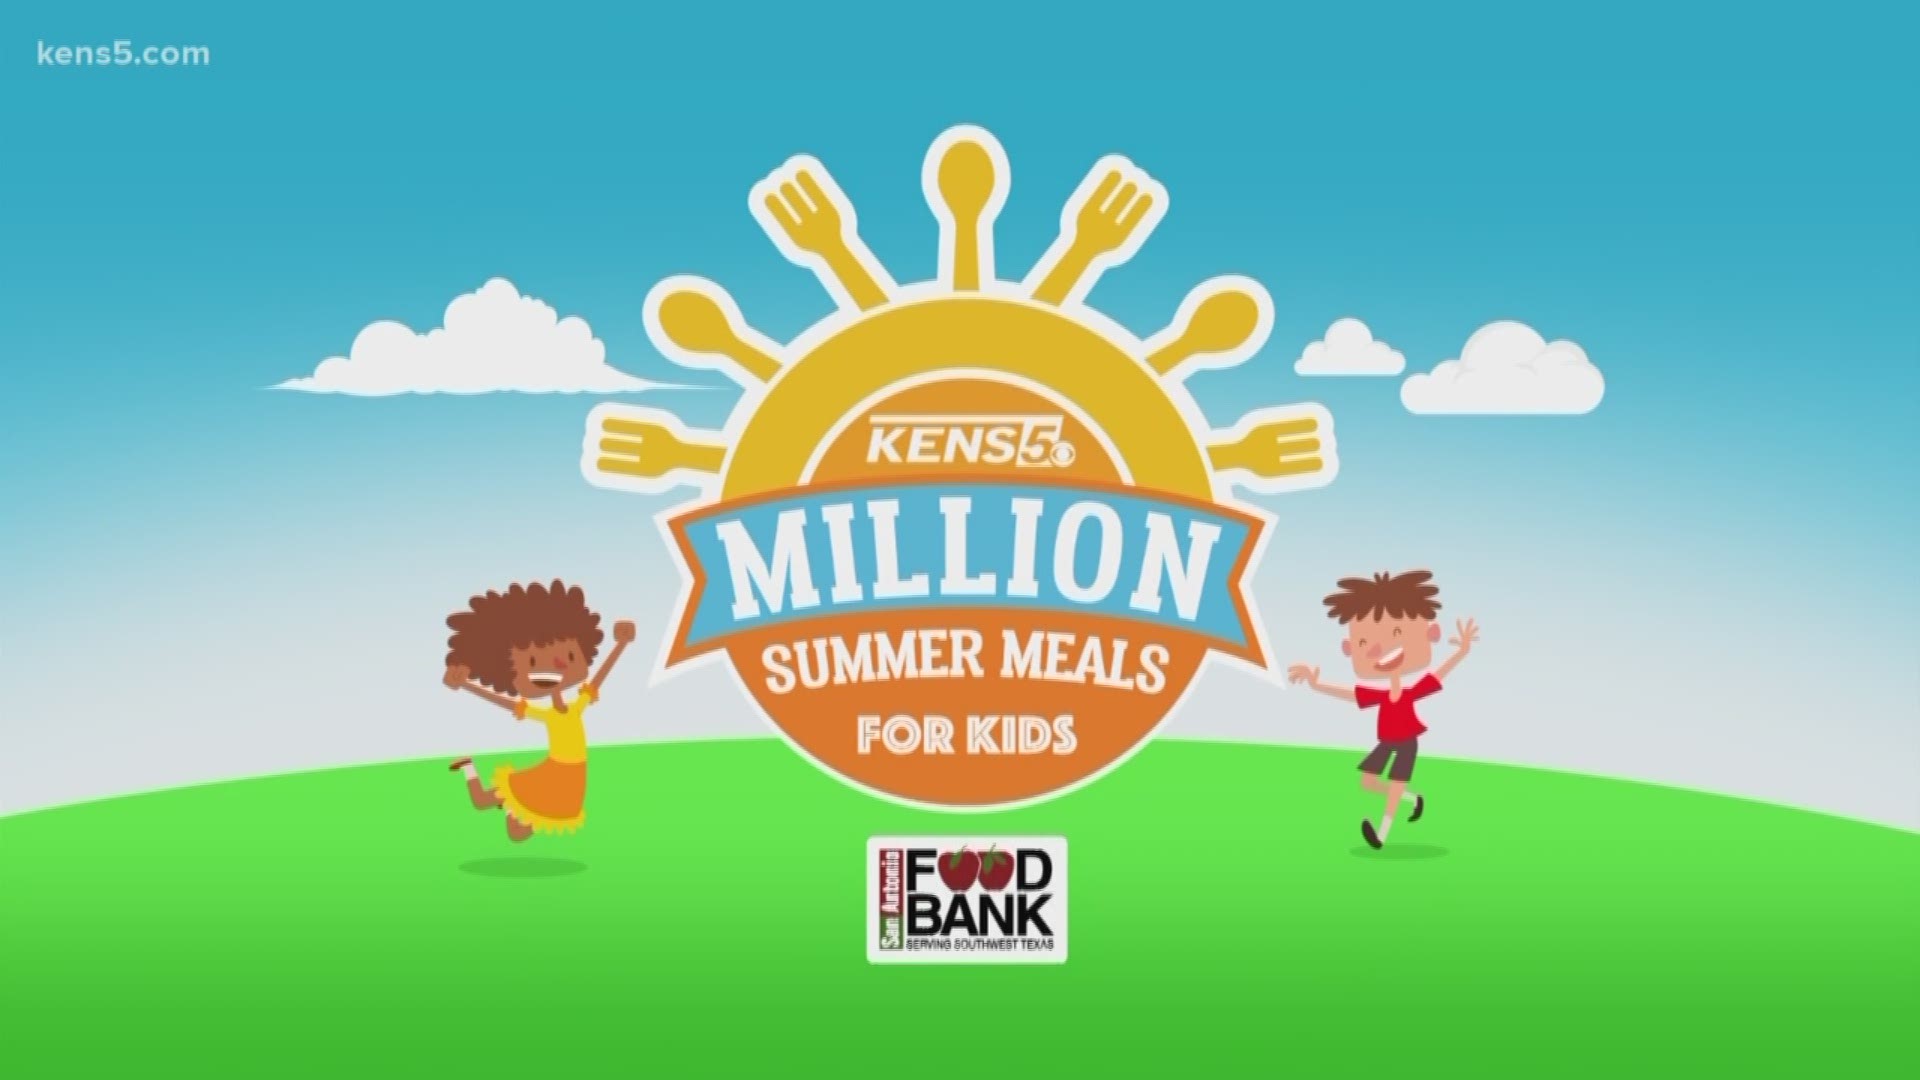 One in four San Antonio children go hungry during the summer because they're not getting meals from school.